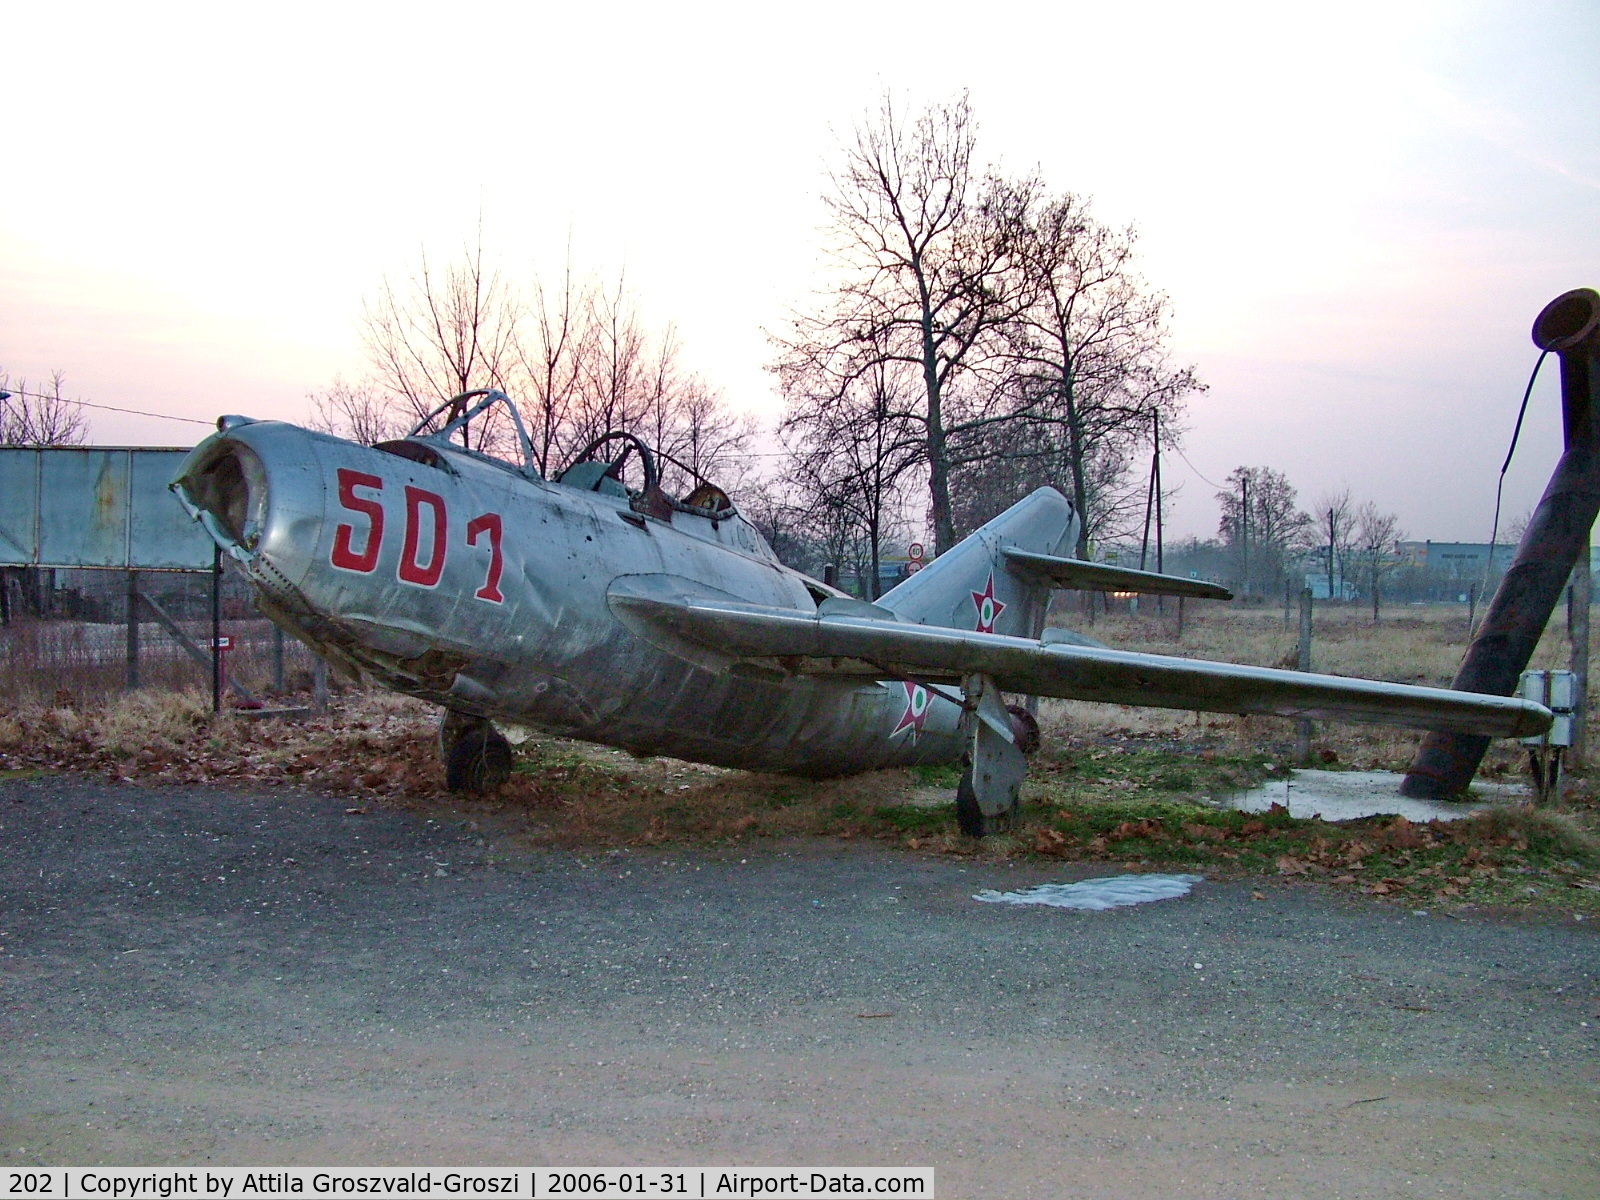 202, 1955 Mikoyan-Gurevich MiG-15UTI C/N 10993202, It was displayed at a gas station on the outskirts of Solt, until it fell off the pedestal